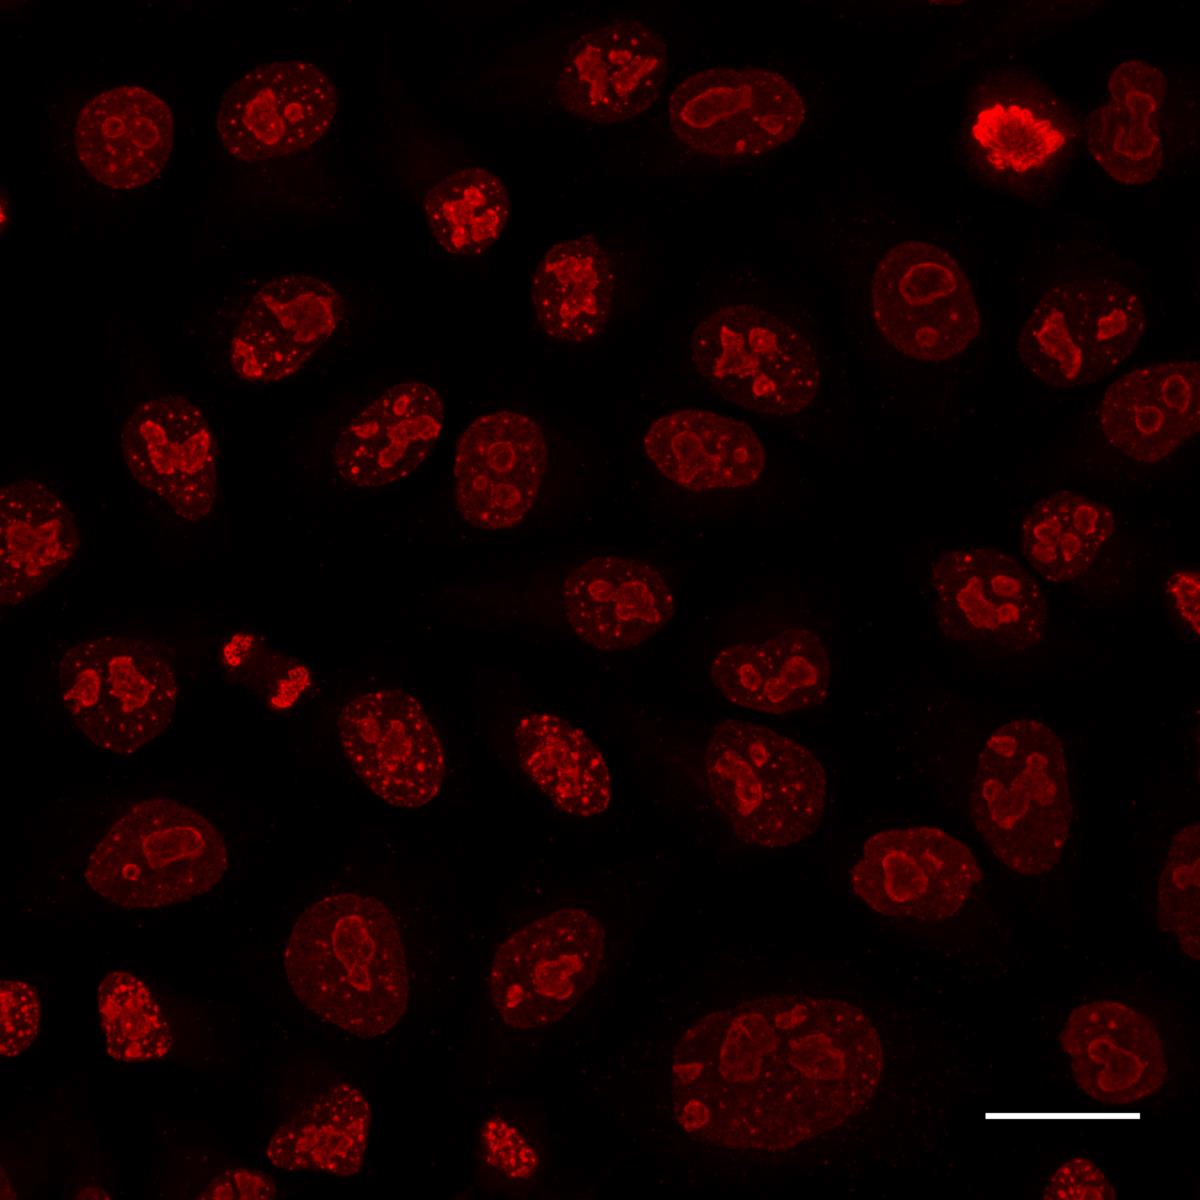 Alpaca anti-rabbit IgG VHH Alexa Fluor® 568 was applied together with rabbit anti-Ki67 antibodies for detection of Ki67 (red) in HeLa cells. Scale bar, 20 μm. Images were recorded at the Core Facility Bioimaging at the Biomedical Center, LMU Munich.